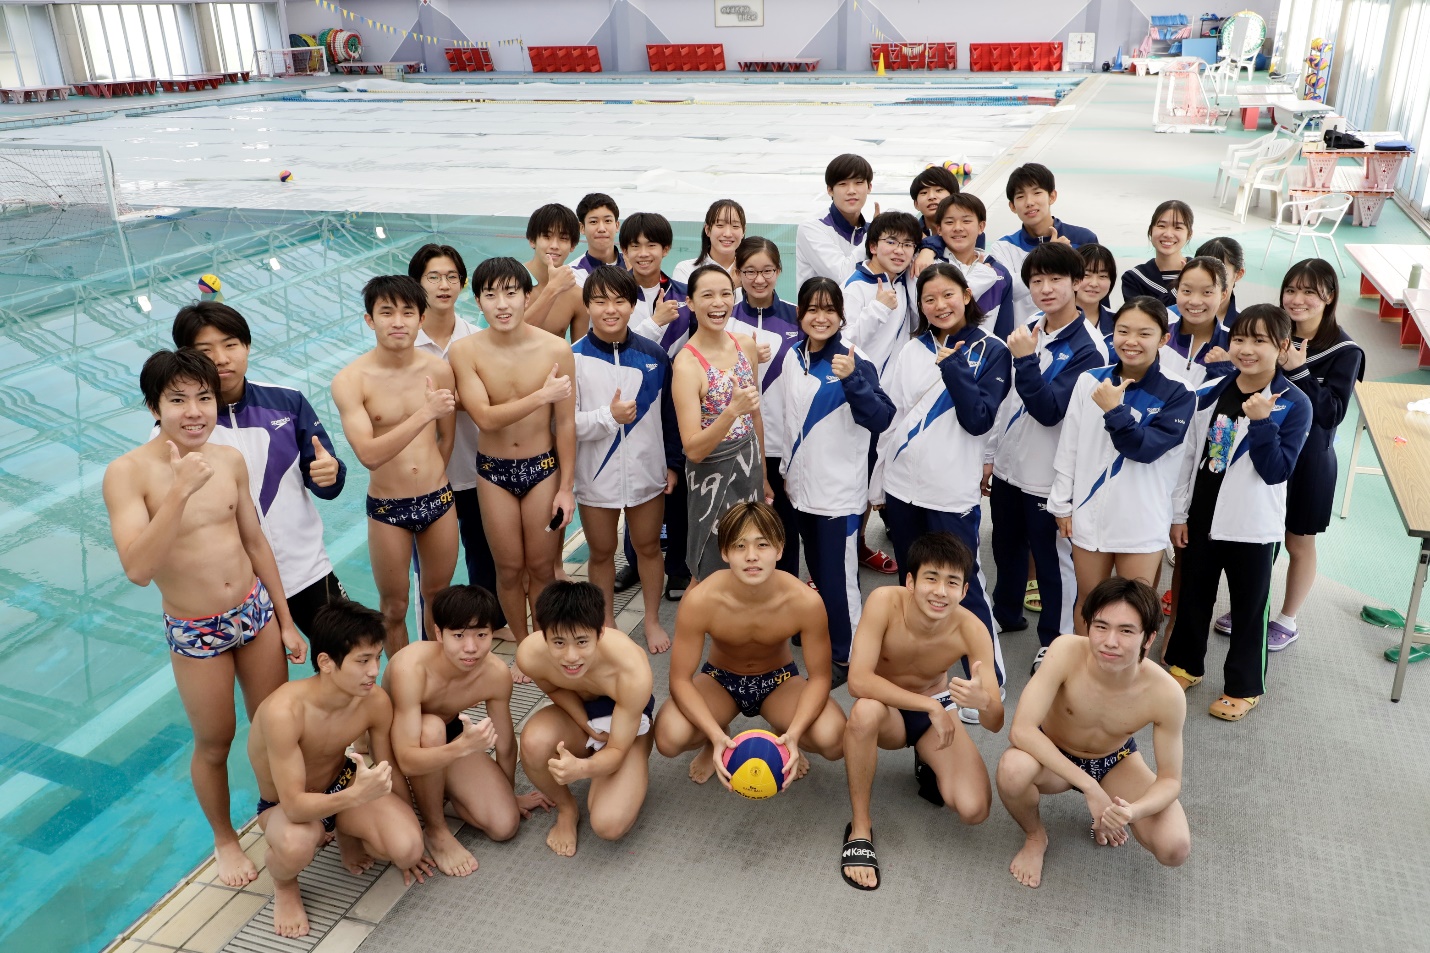 Photo: Tania receives a warm welcome from members of Ibaraki high school swimming team